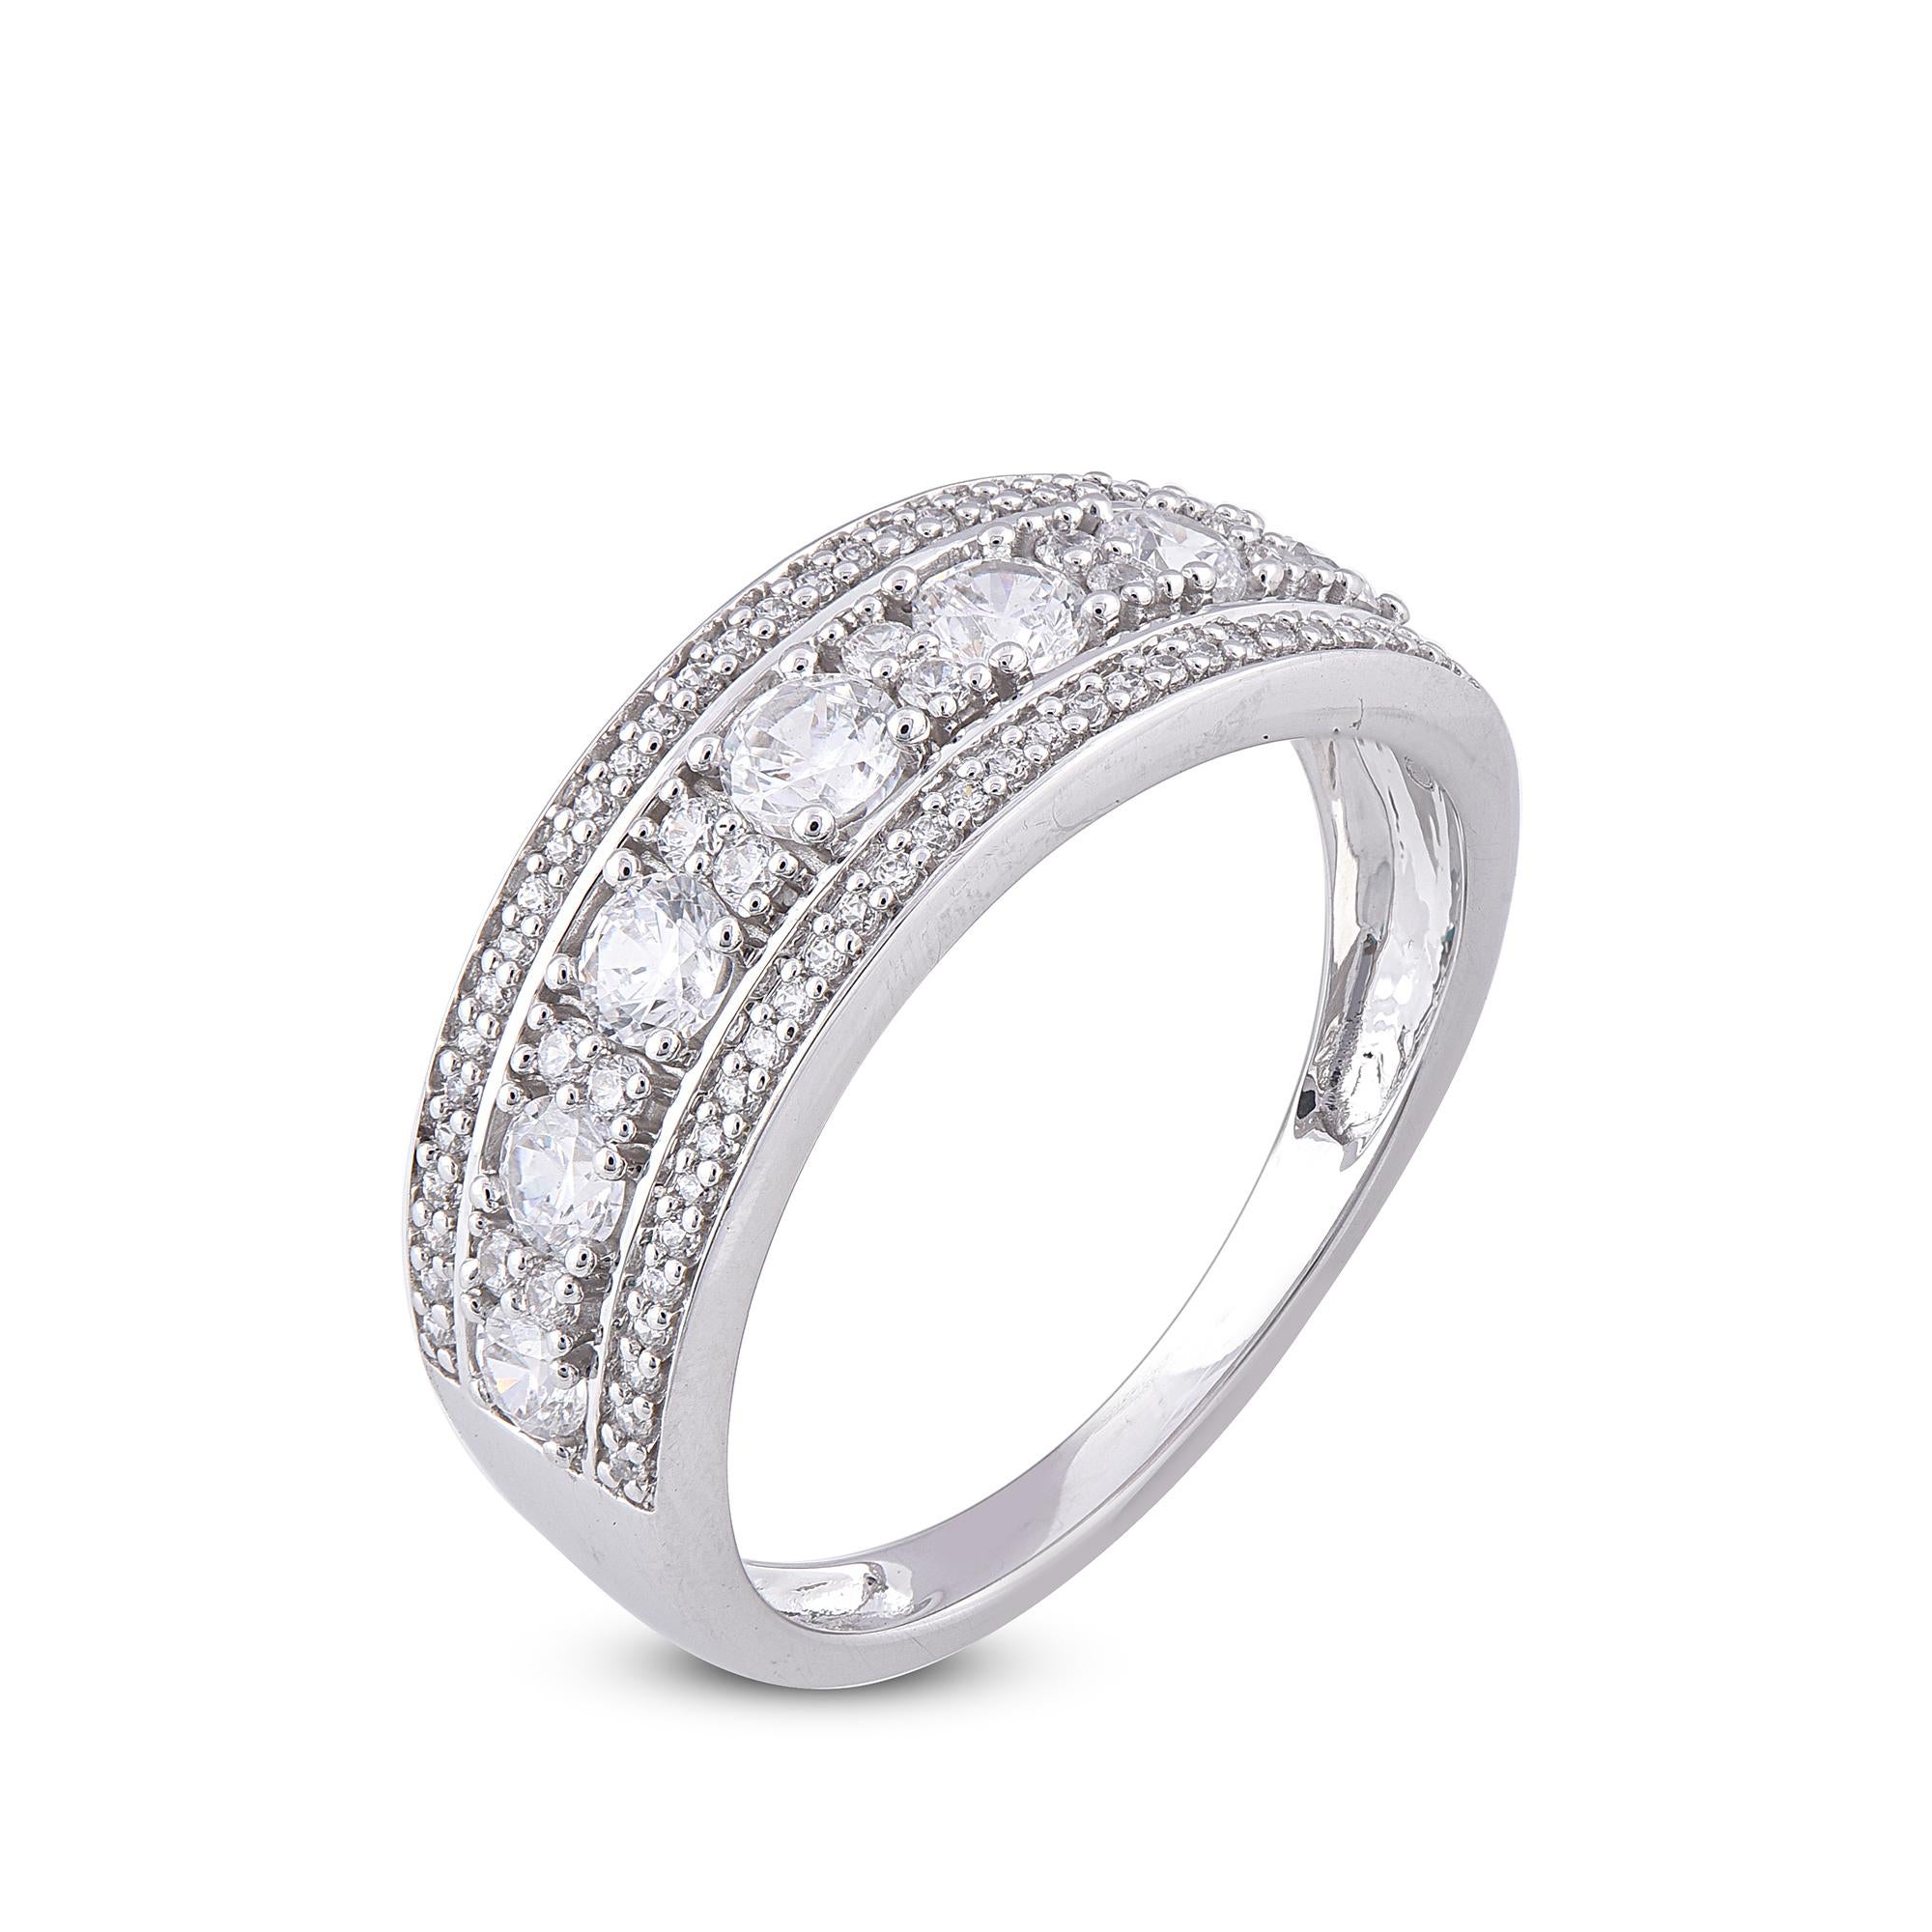 Round Natural Diamond Wedding Band Ring adds a touch to sophistication to your style with this 14 Karat White Gold. This ring featuers 77 Round White Diamonds set in prong and pave setting a beautiful design forming a unique pattern. This ring has